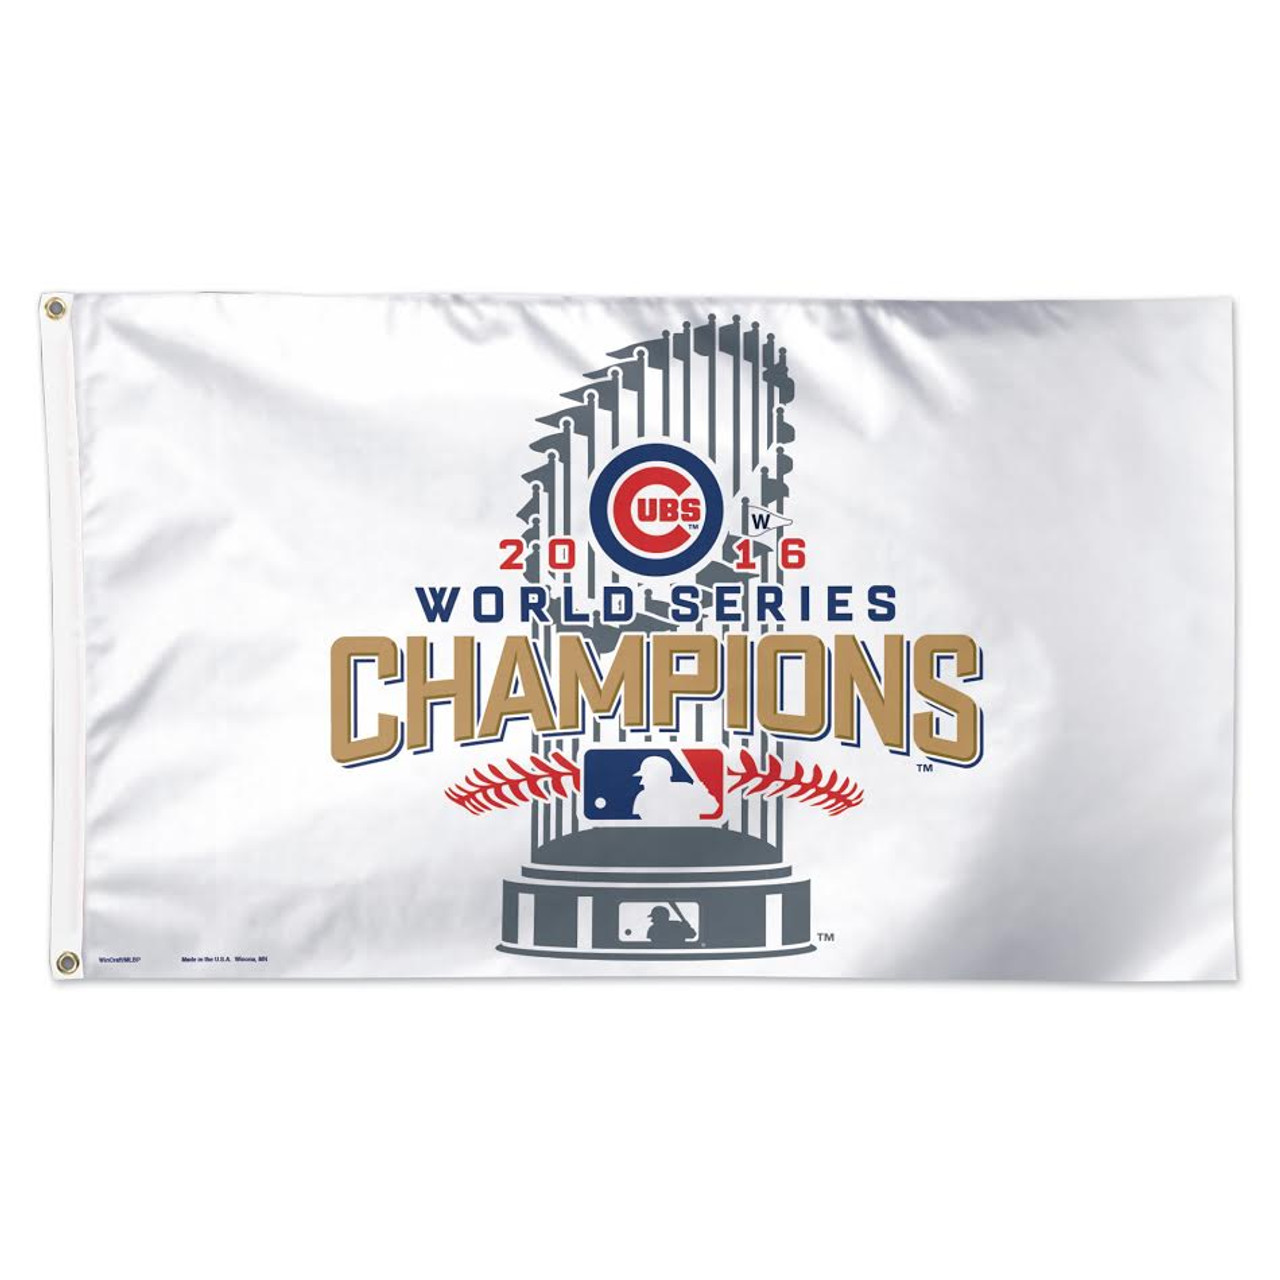 Congratulations to the World Series Champions: The Chicago Cubs